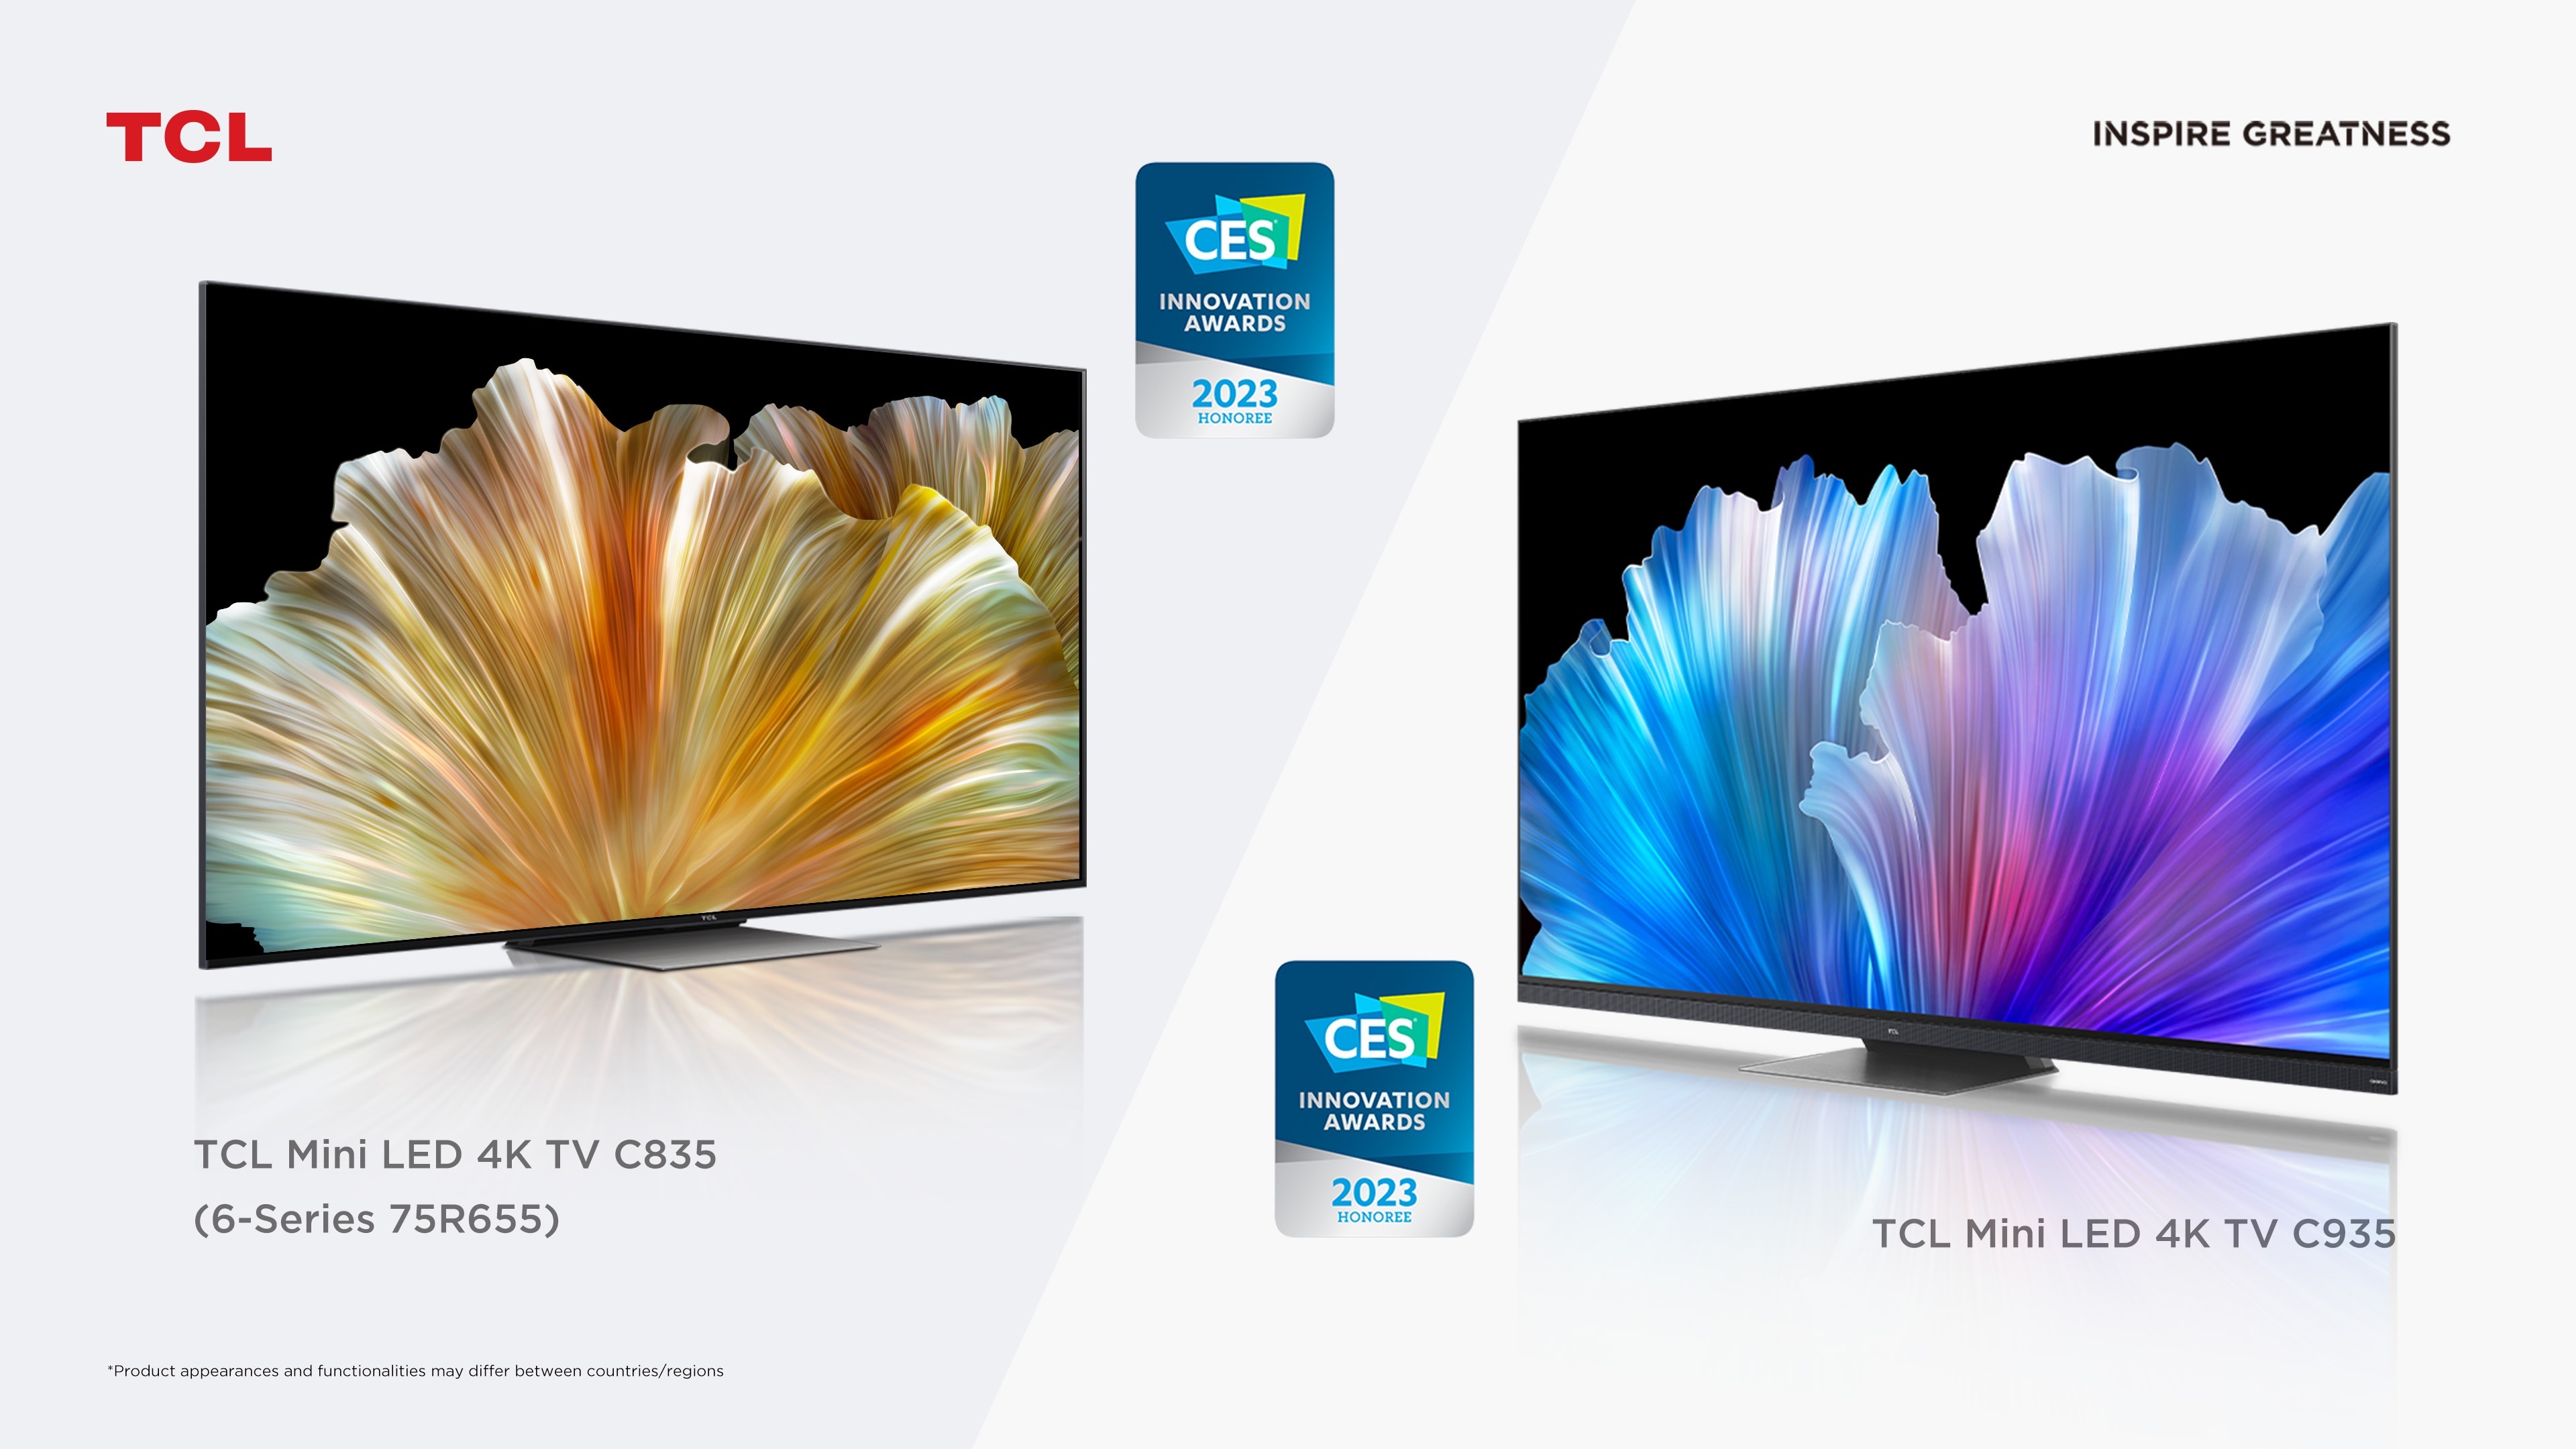 TCL CES 2023 Innovations Awards